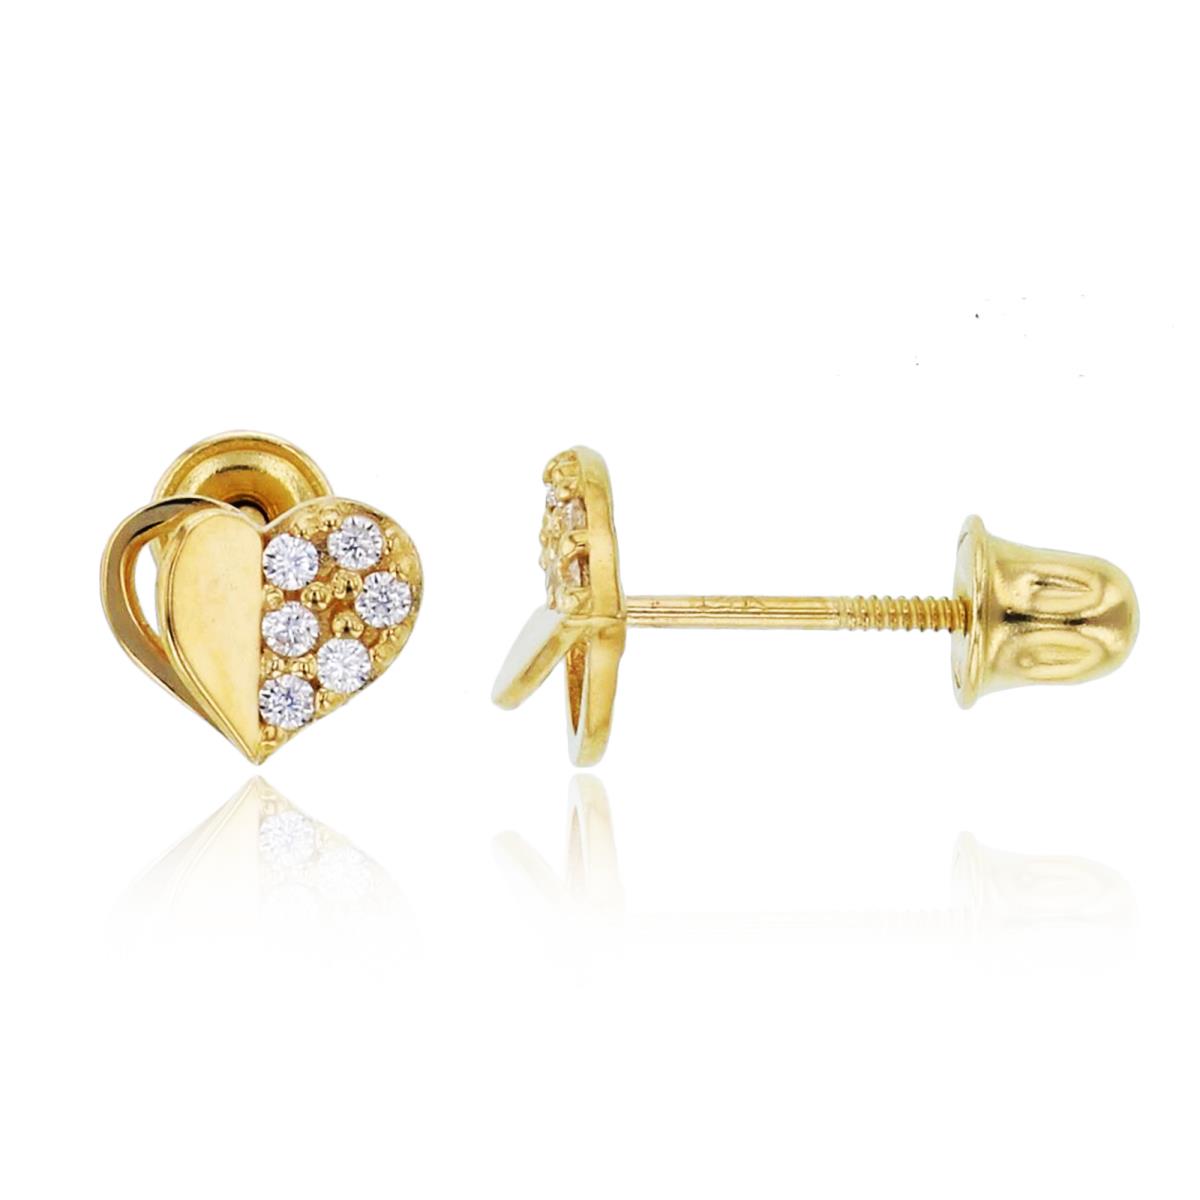 14K Yellow Gold Half Rnd CZ & High Polished Micropave Heart Studs with Screw Backs